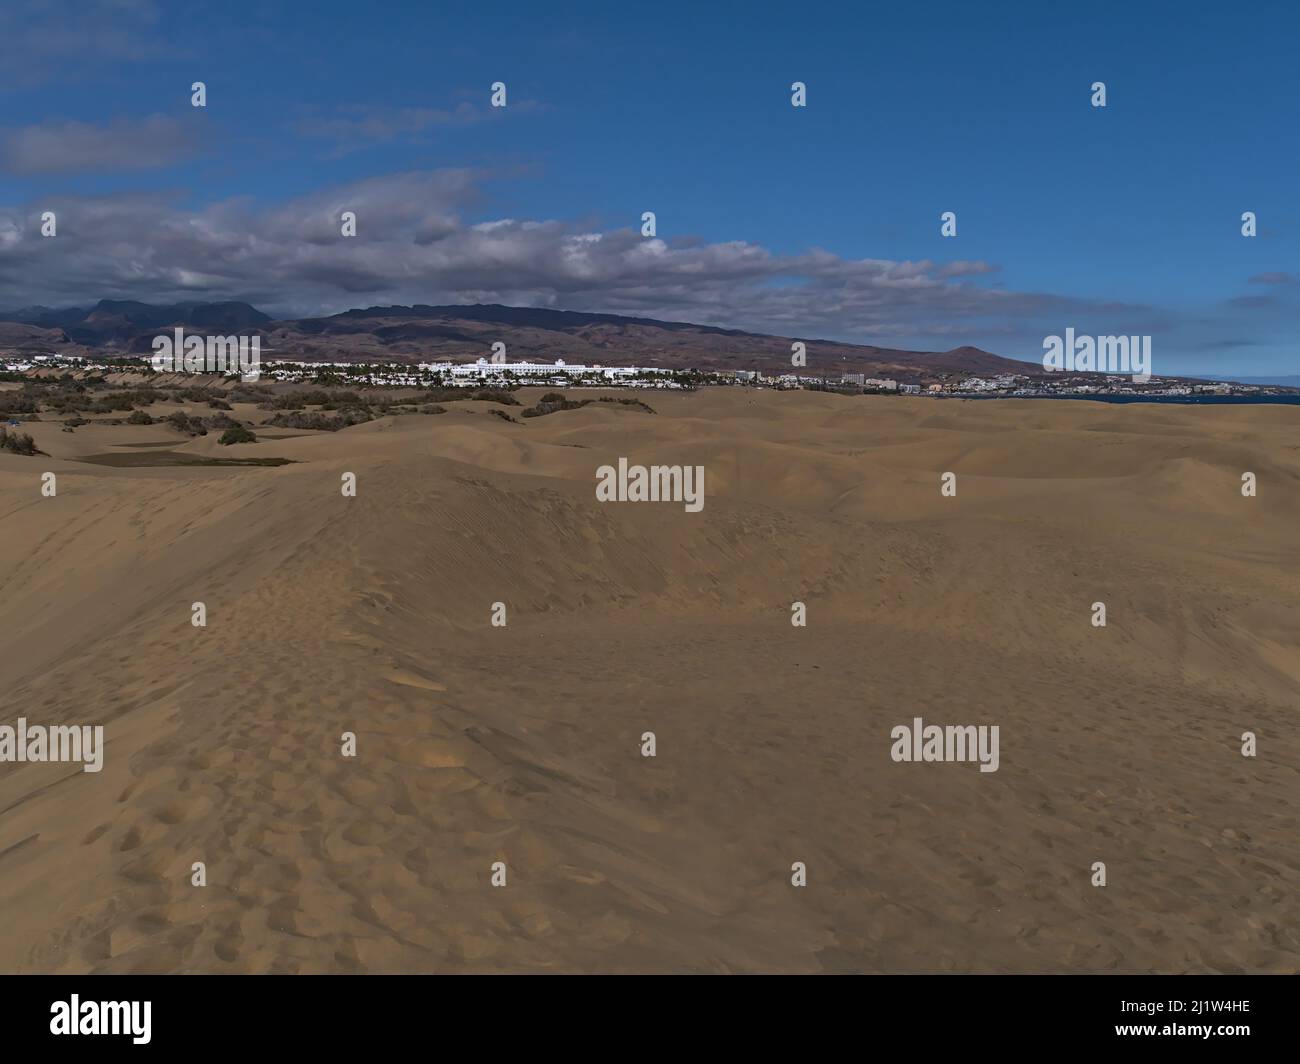 View of popular natural reserve Dunas de Maspalomas in the south of island Gran Canaria, Canary Islands, Spain on the Atlantic coast with sand dunes. Stock Photo